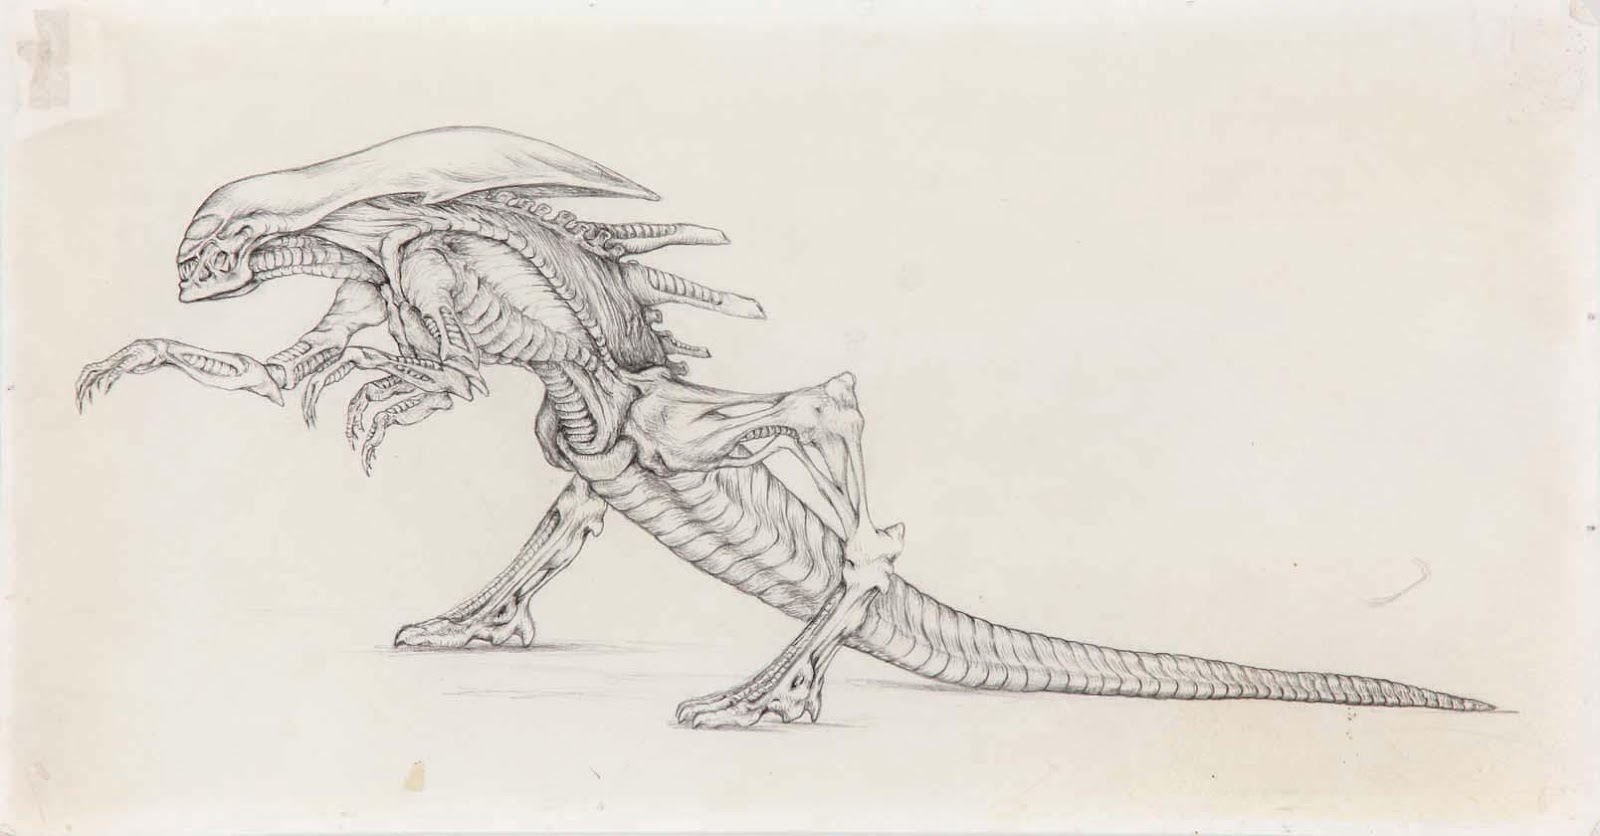 Alien Explorations: Aliens: Alien Queen concept drawing by Stan Winston  references The Witches Route (from around 1520) by Marcantonio Raimondi and  Agostino Veneziano?